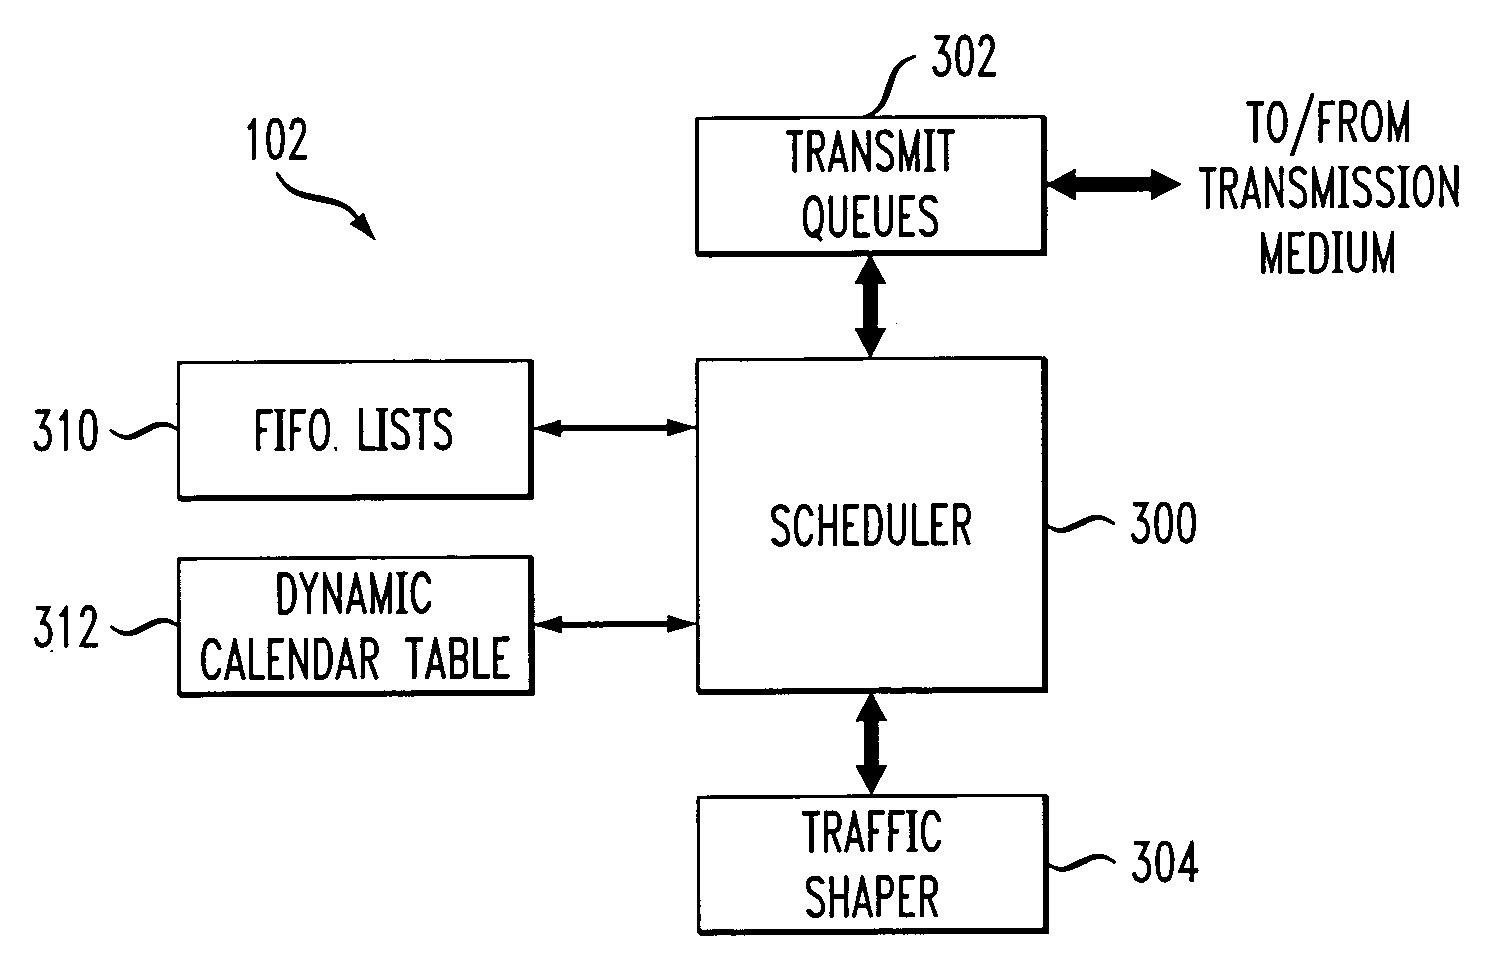 Processor with scheduler architecture supporting multiple distinct scheduling algorithms